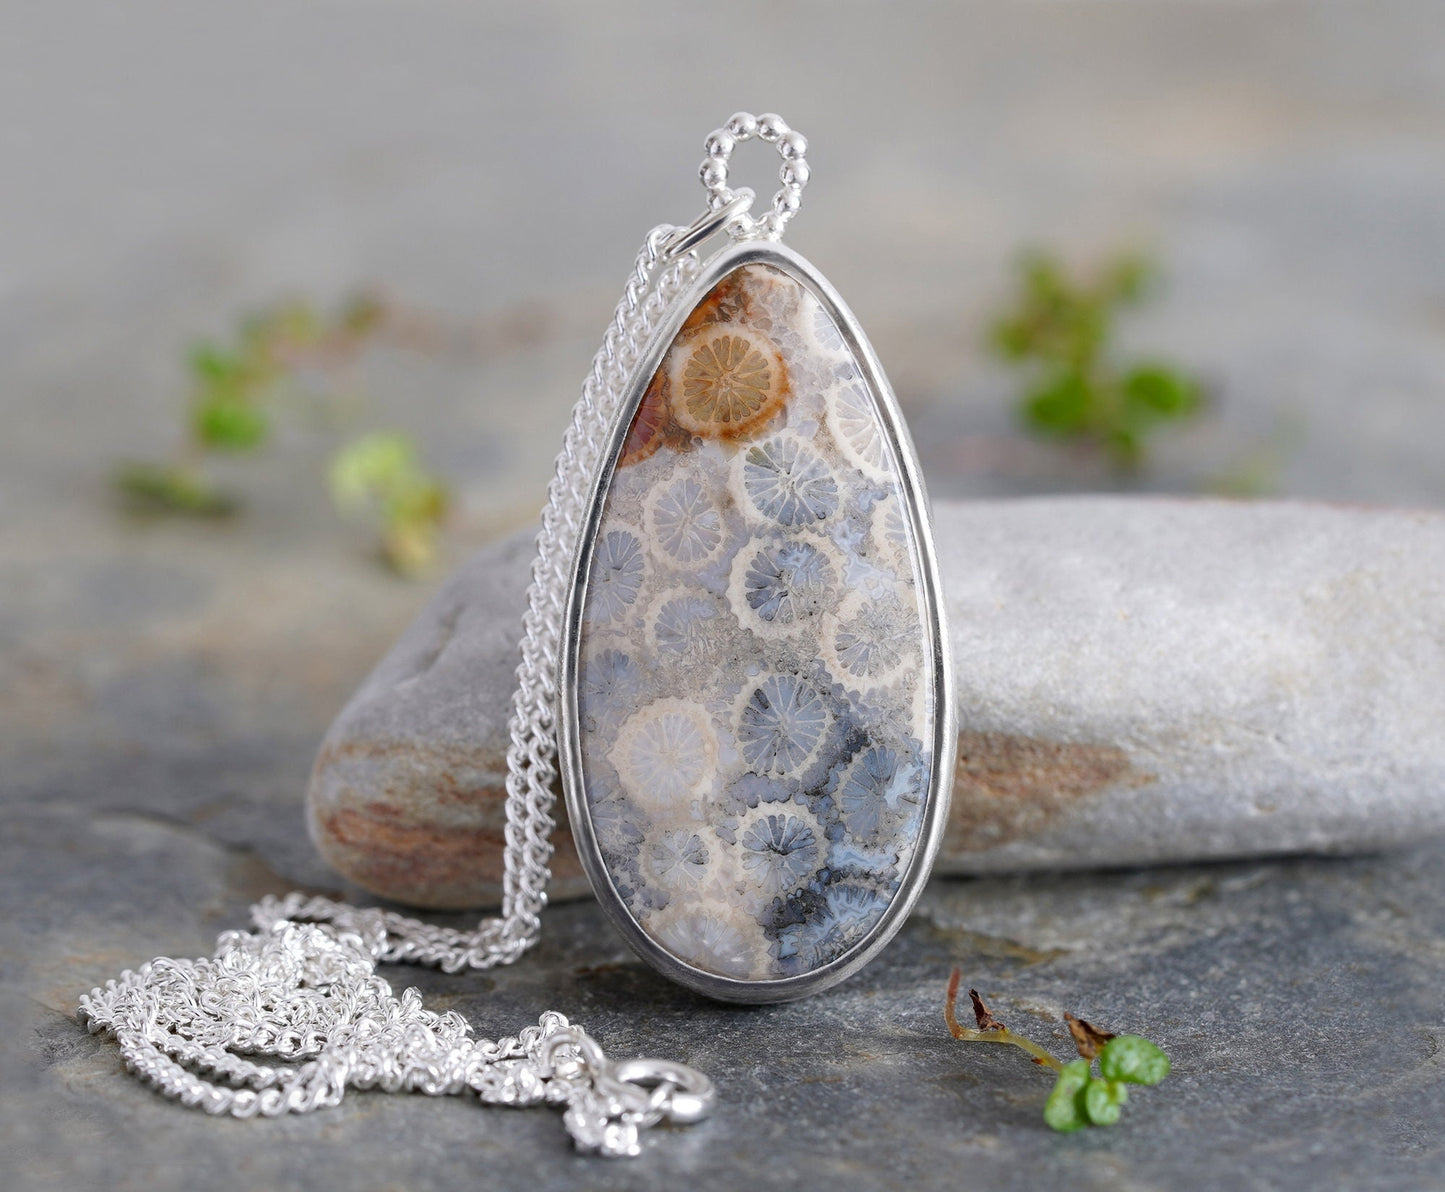 32ct Teardrop Fossilized Coral Necklace, Fossil Coral Necklace, One-of-a-kind Necklace